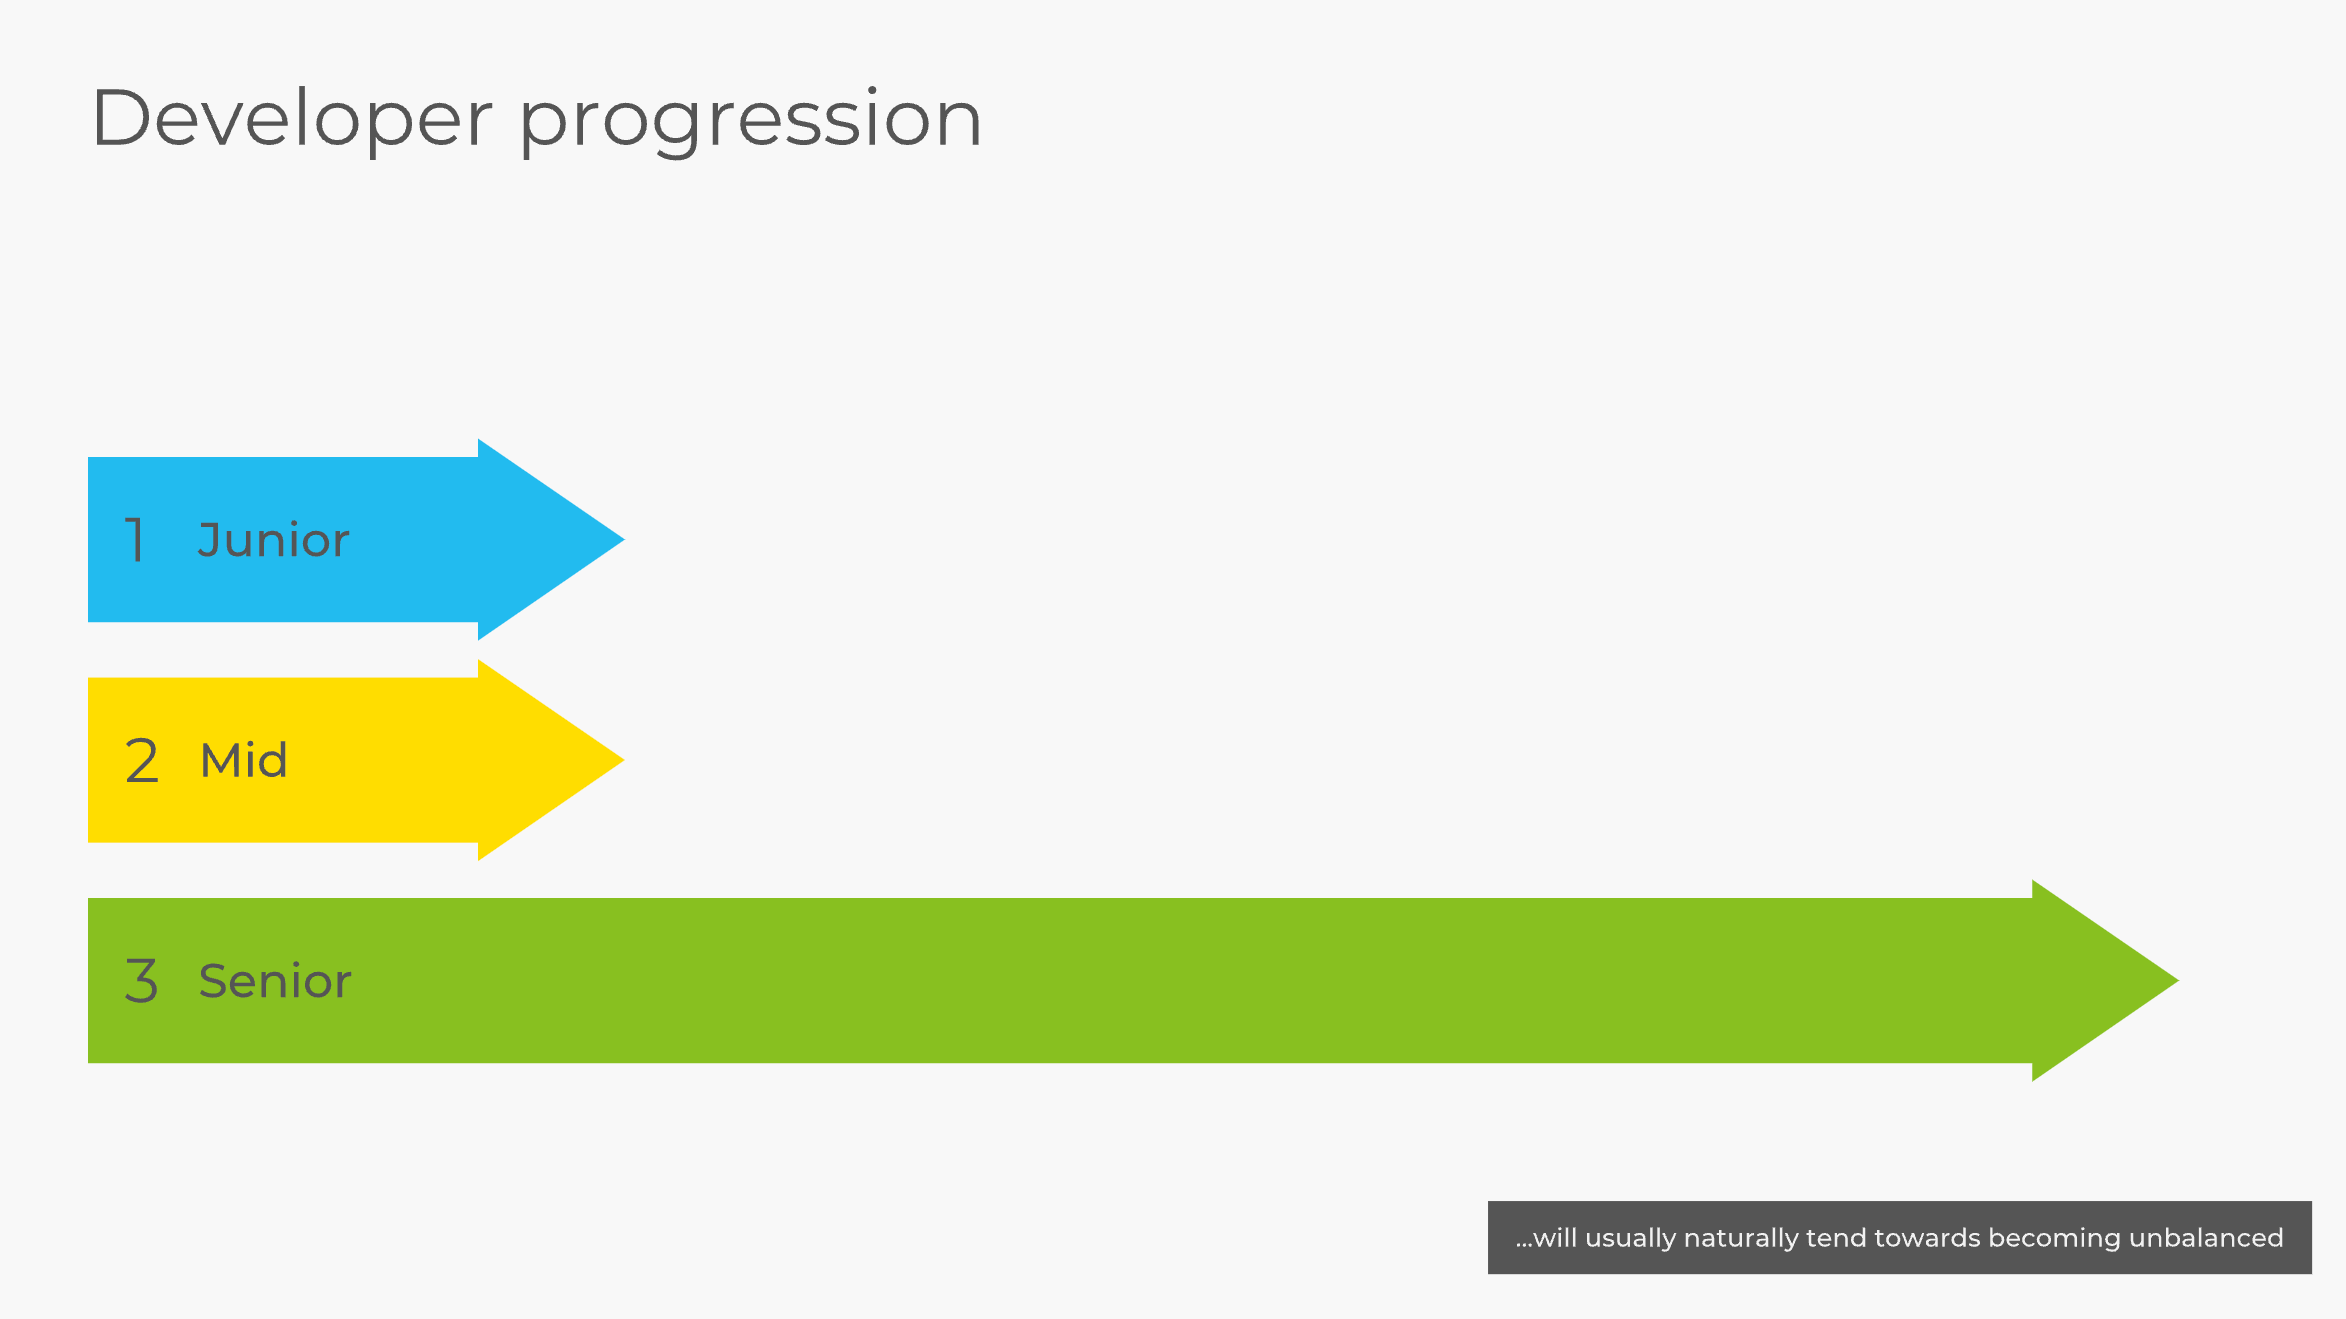 A diagram showing how the Developer Progression can lead the team to be unbalanced in levels of experience